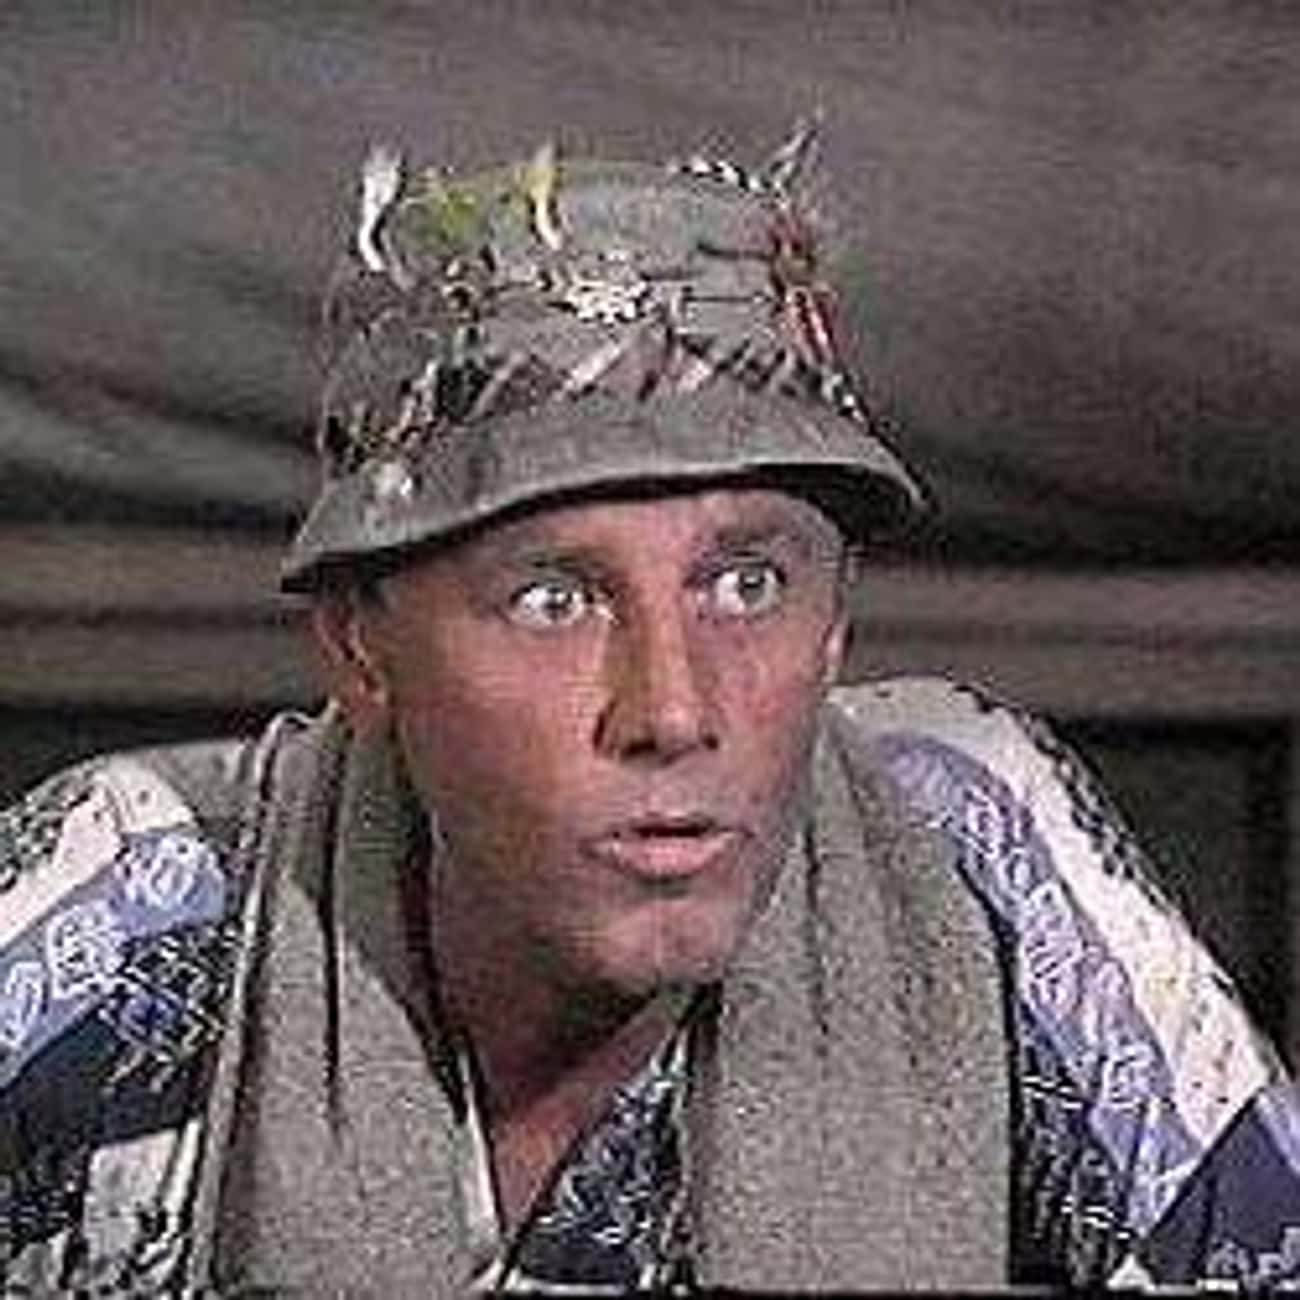 McLean Stevenson Said His Post ‘M*A*S*H’ Career Was Tough Because ‘People Were Enamored With Henry Blake, Not McLean Stevenson’